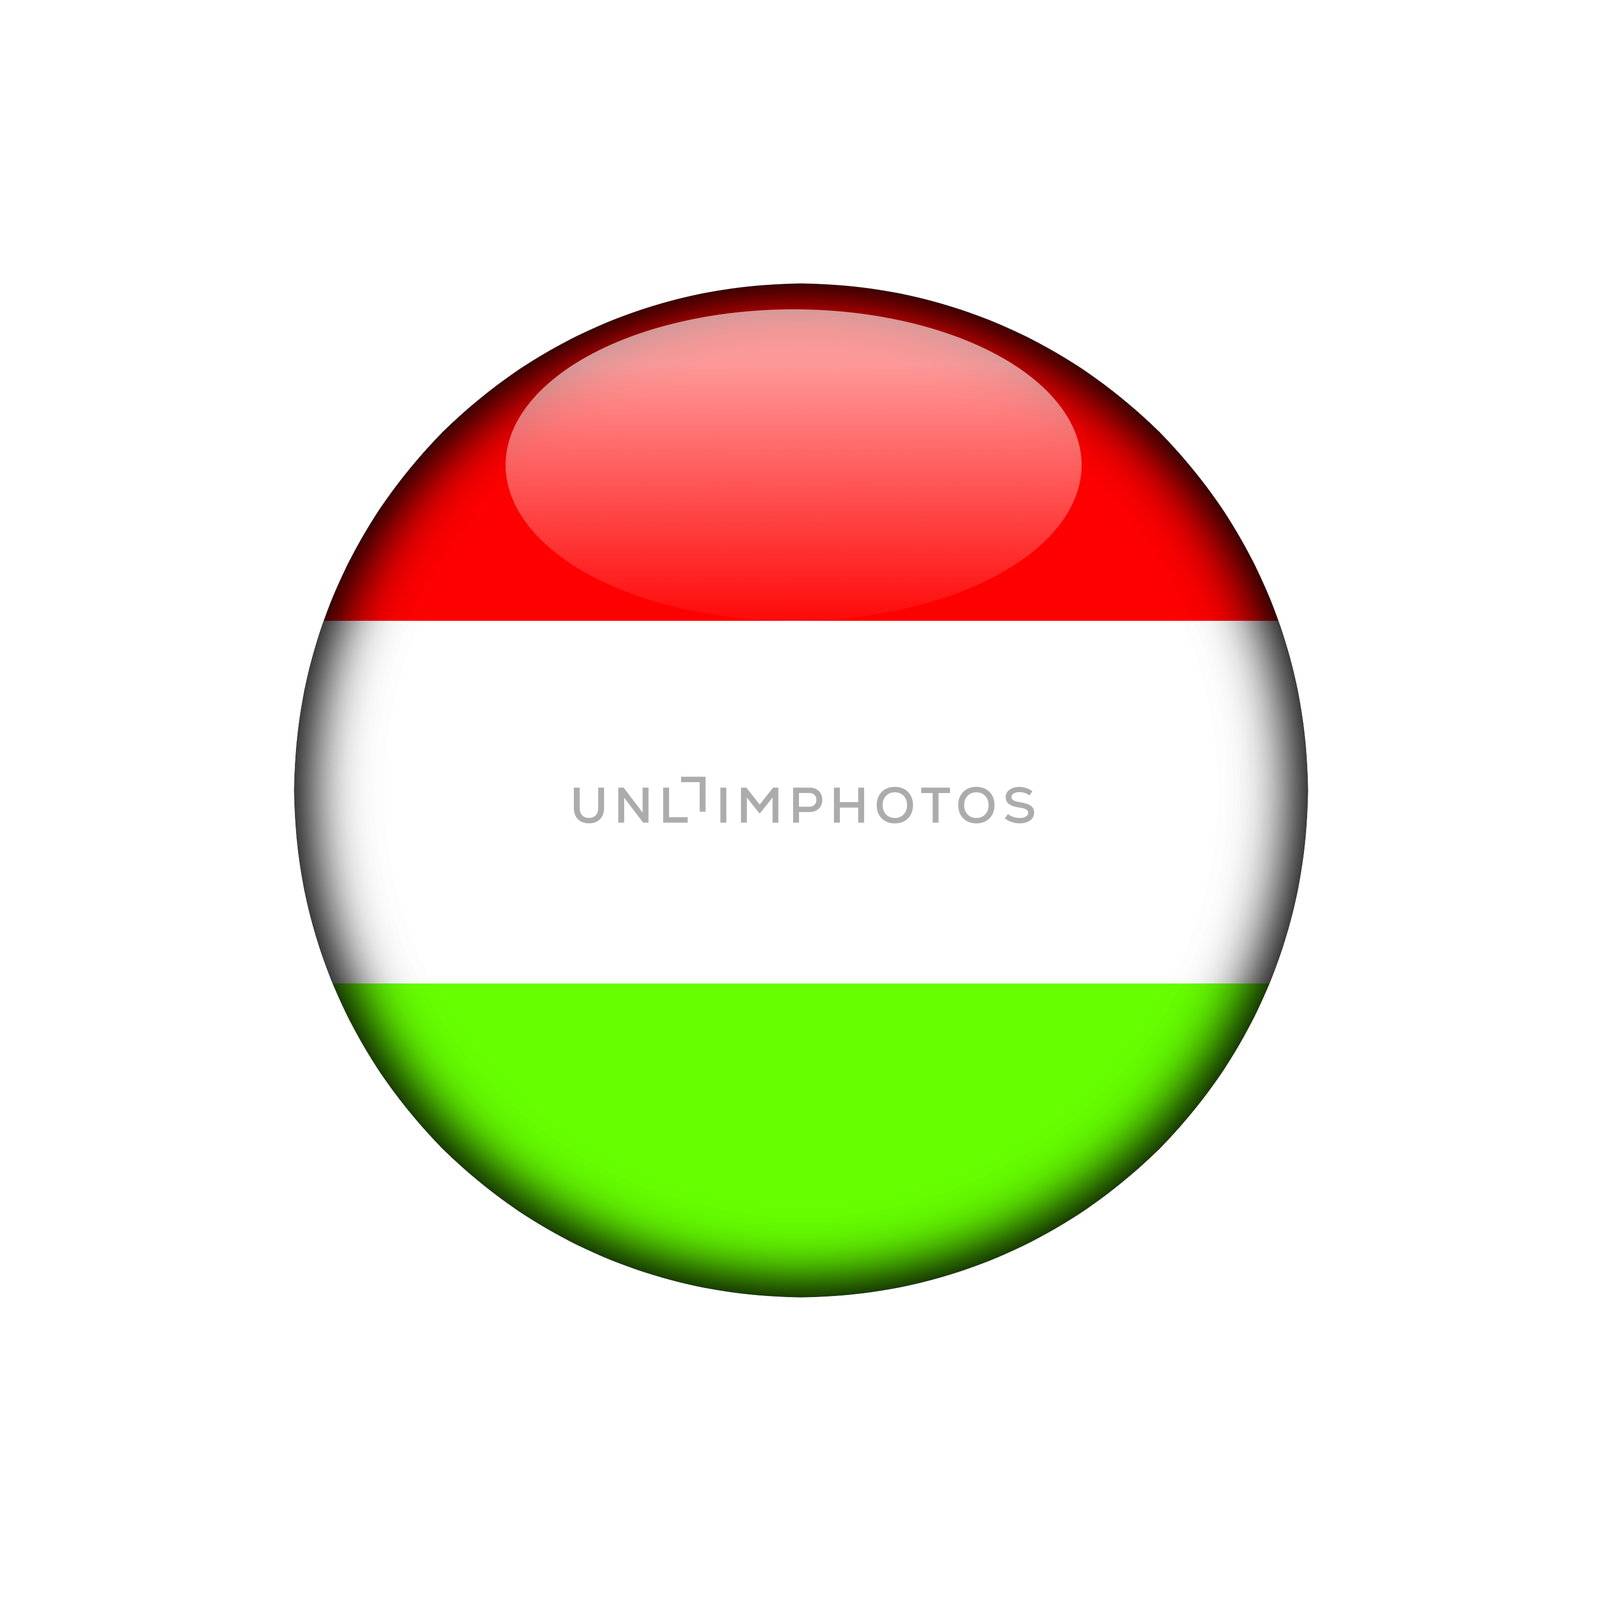 hungary button flag sign or badge for website